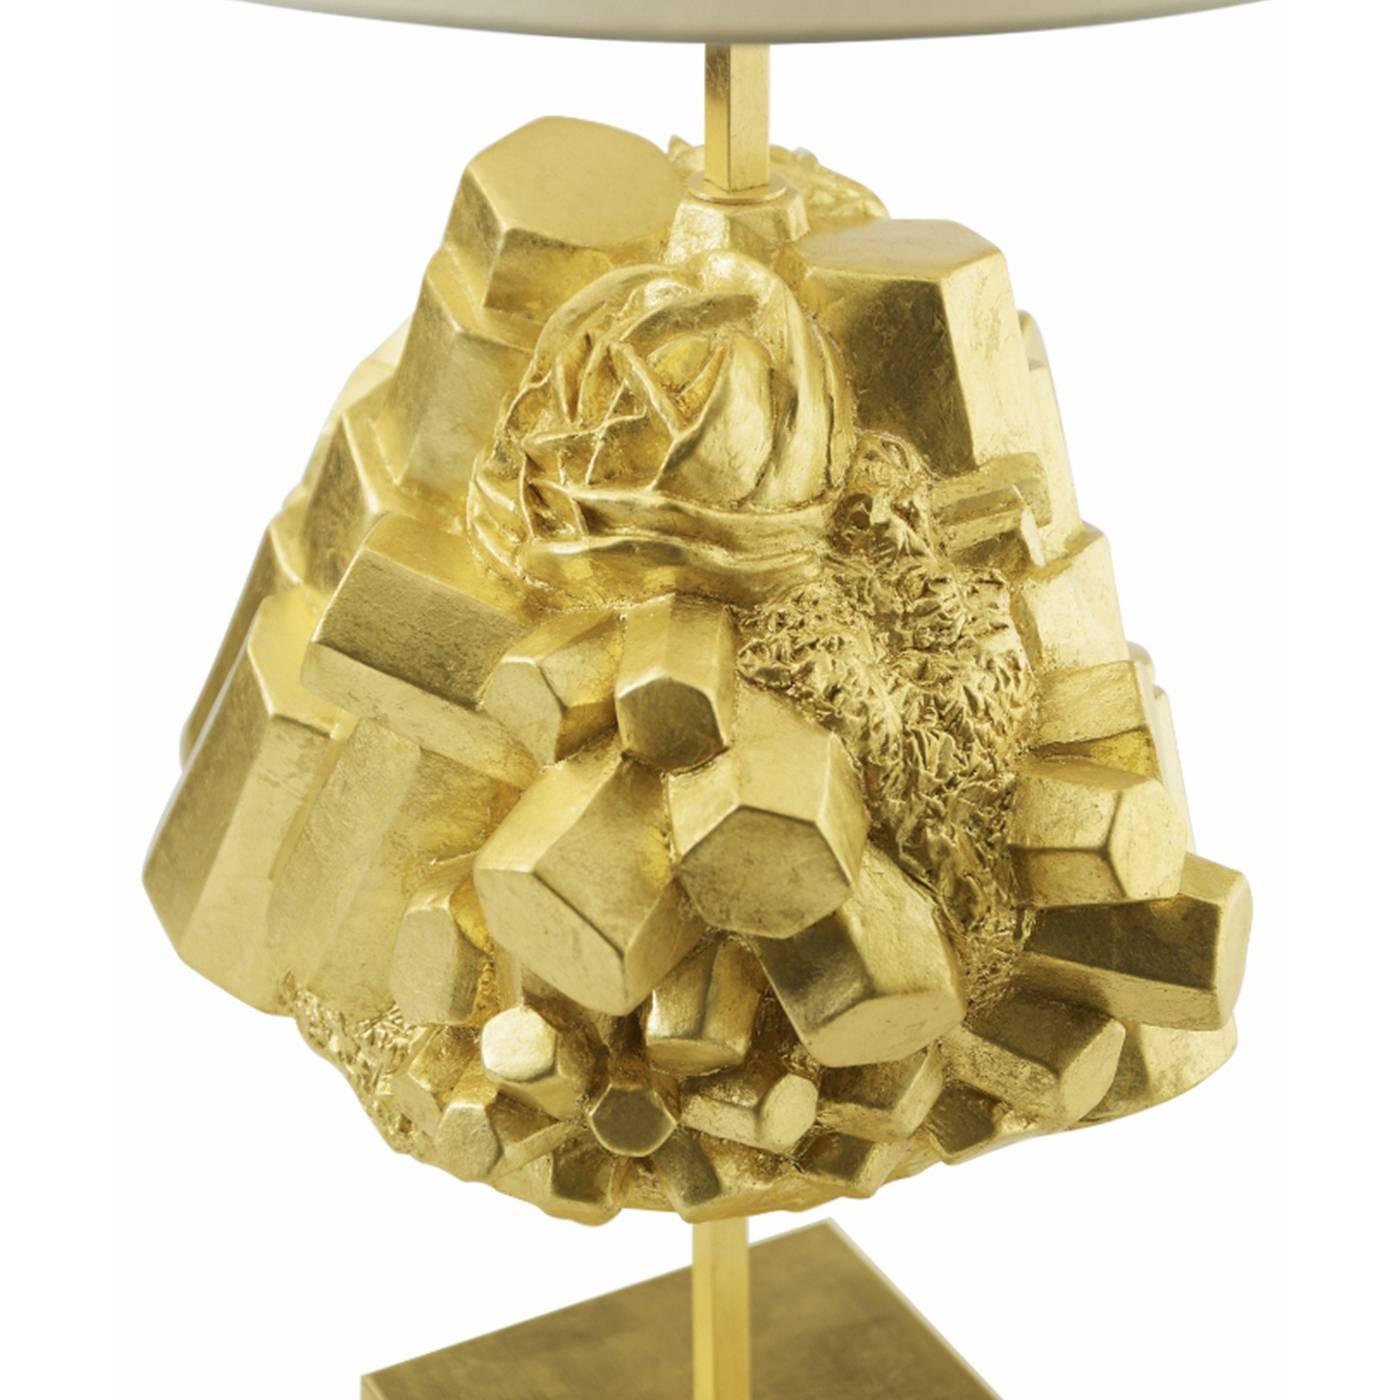 This striking table lamp features a metal structure resting on a gold finished square base that supports a white fabric shade. The standout element of the piece is a sculpture used as decorative accent and made entirely of ceramic with a gold finish